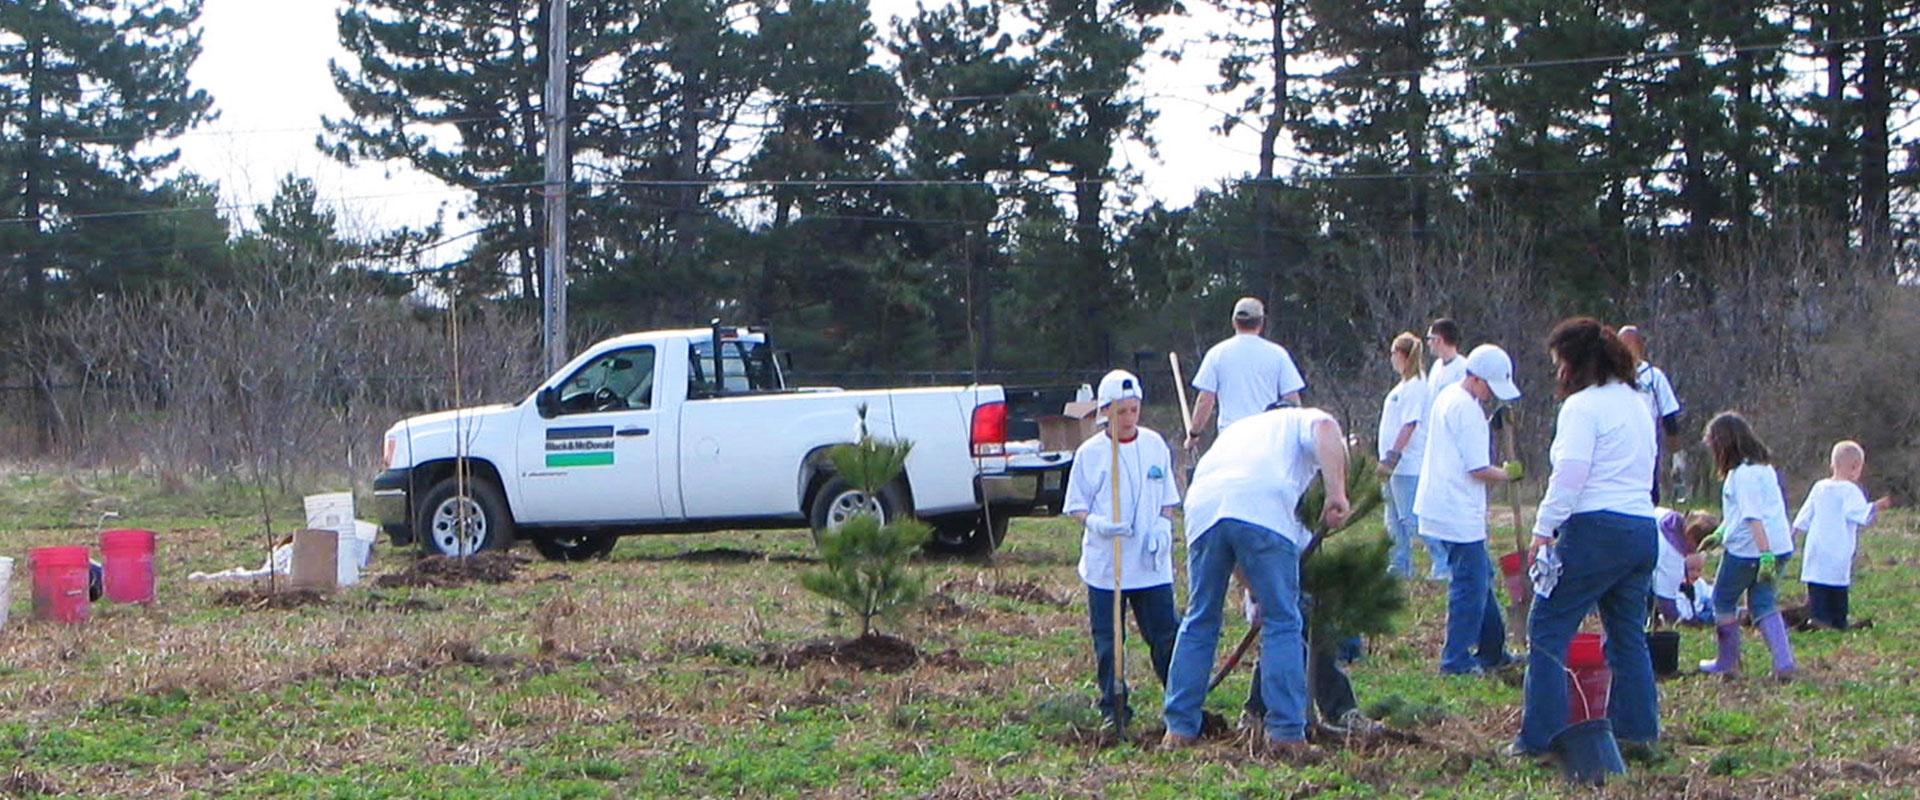 B&M employees and their families at a CSR event planting trees